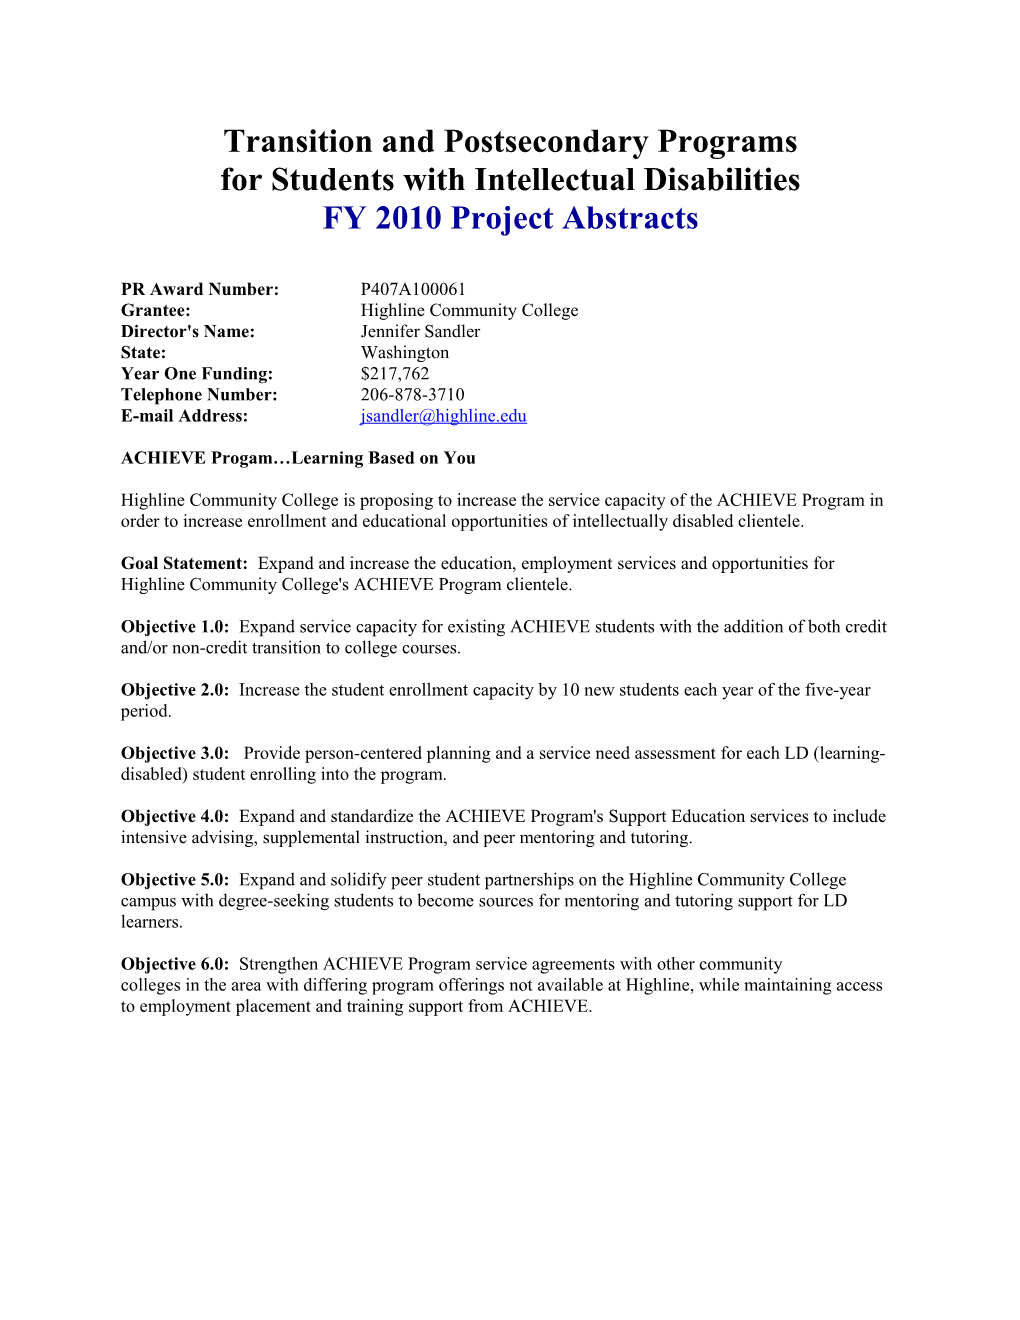 FY 2010 Project Abstracts for the Transition Programs for Students with Disabilities Into